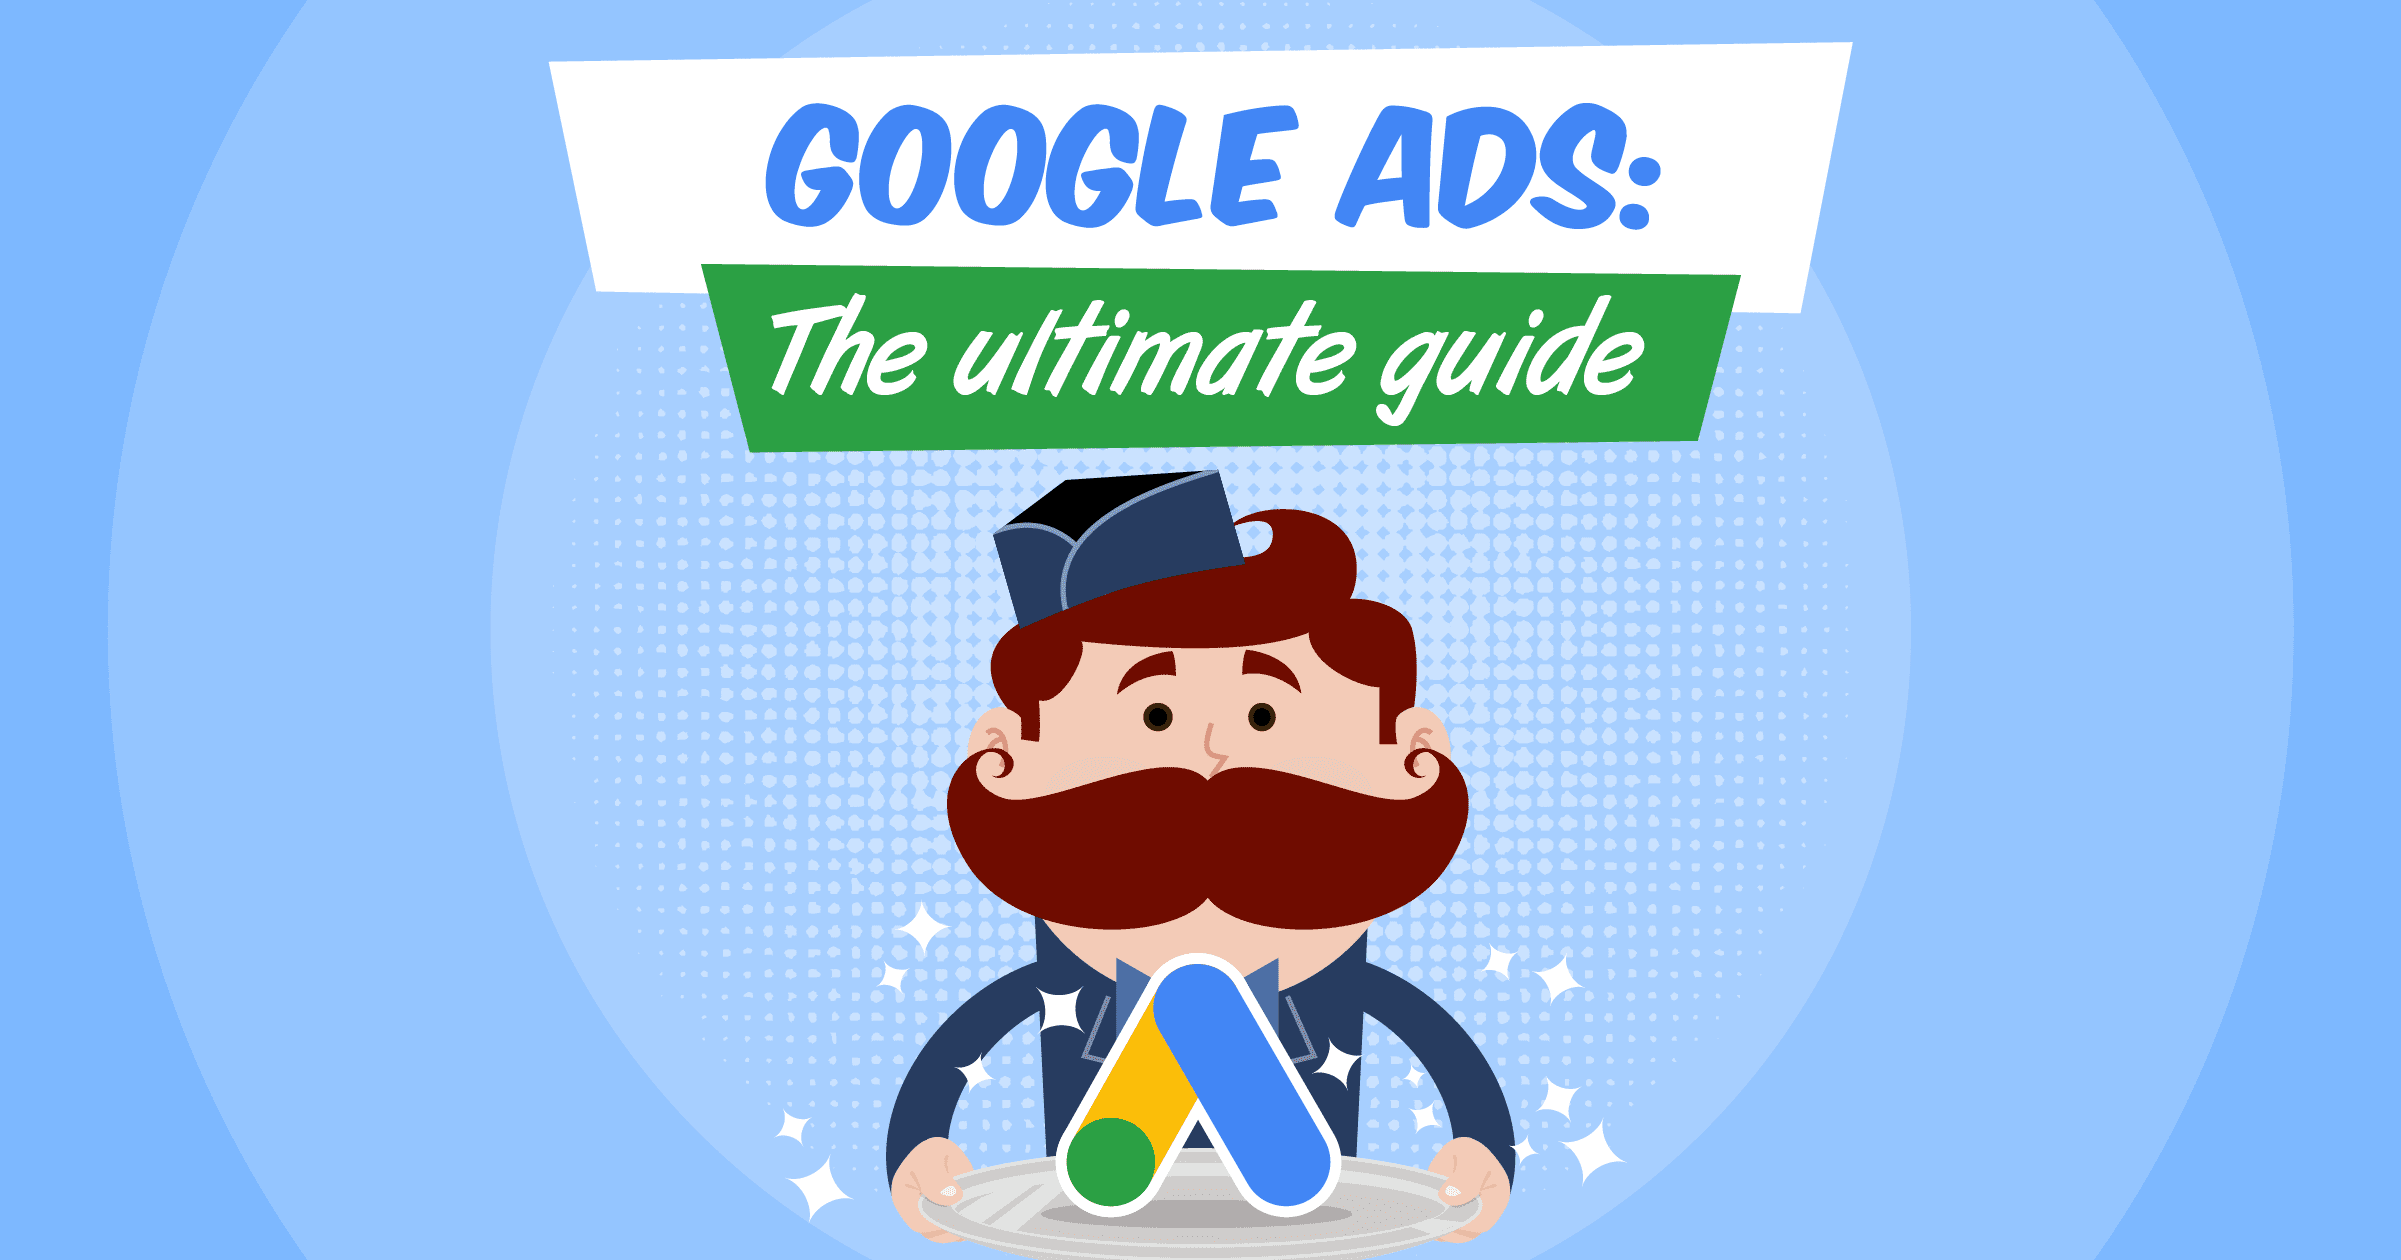 Google Ads. A complete guide for Google Ads.